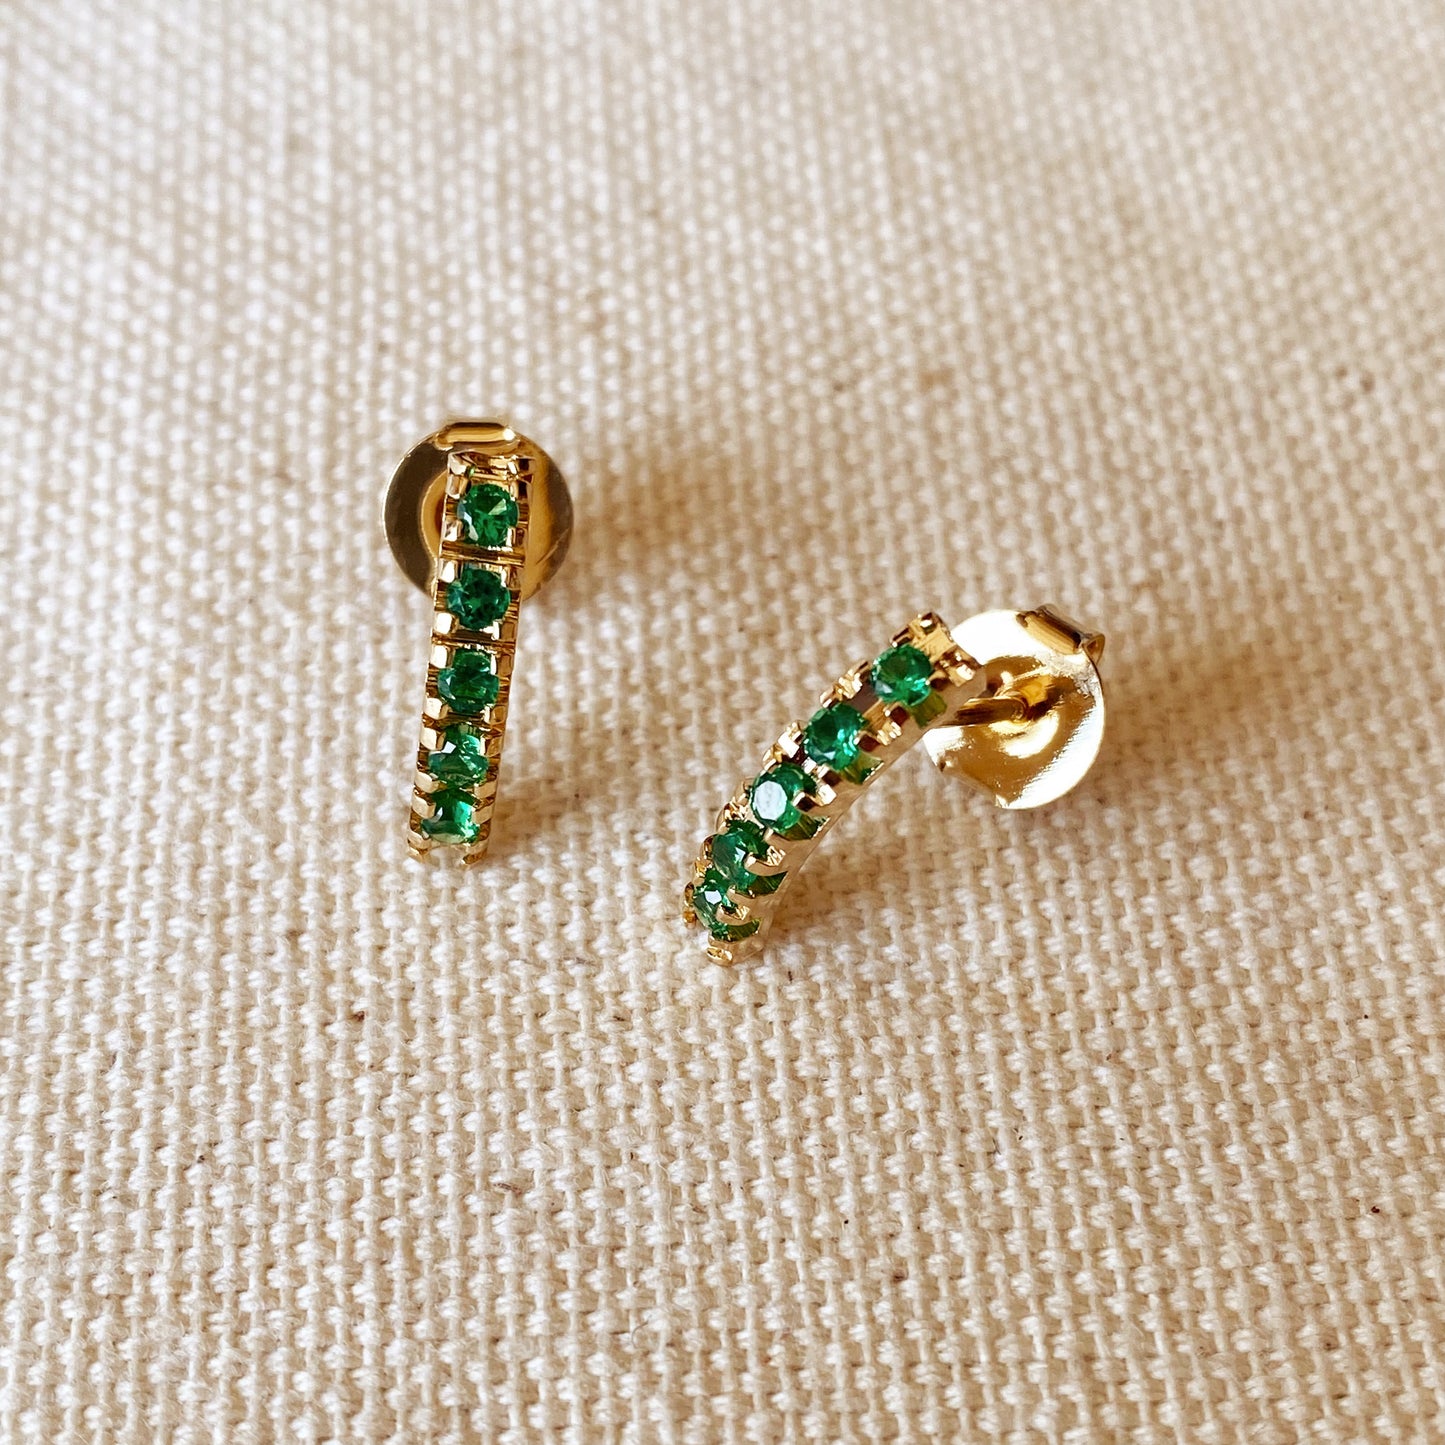 GoldFi 18k Gold Filled Curved Bar Emerald Green Crystal Stud Earrings